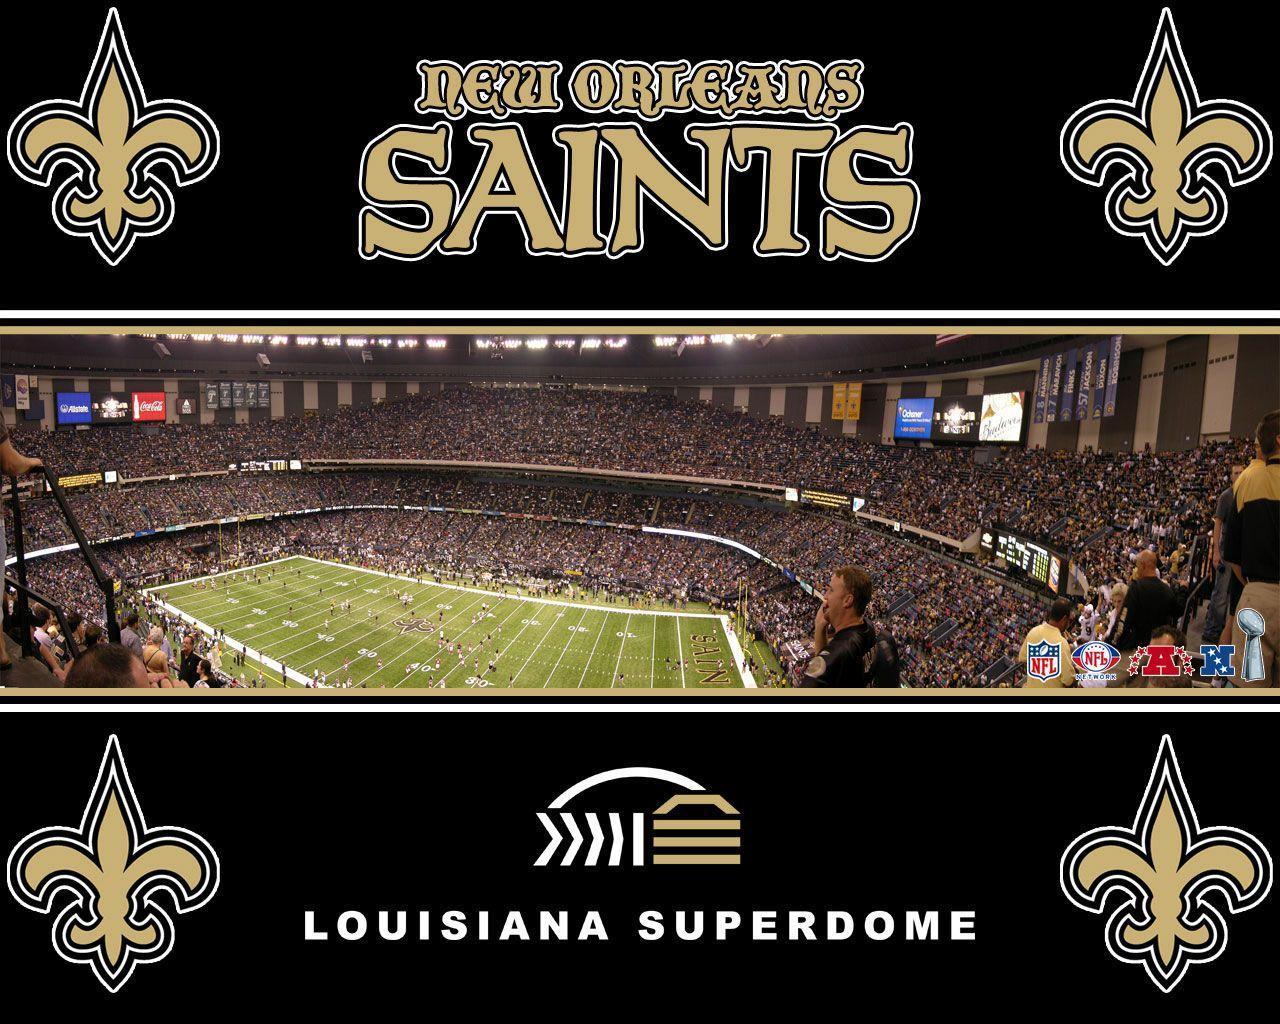 New Orleans Saints Forums In Qytajo.github.com. Source Code